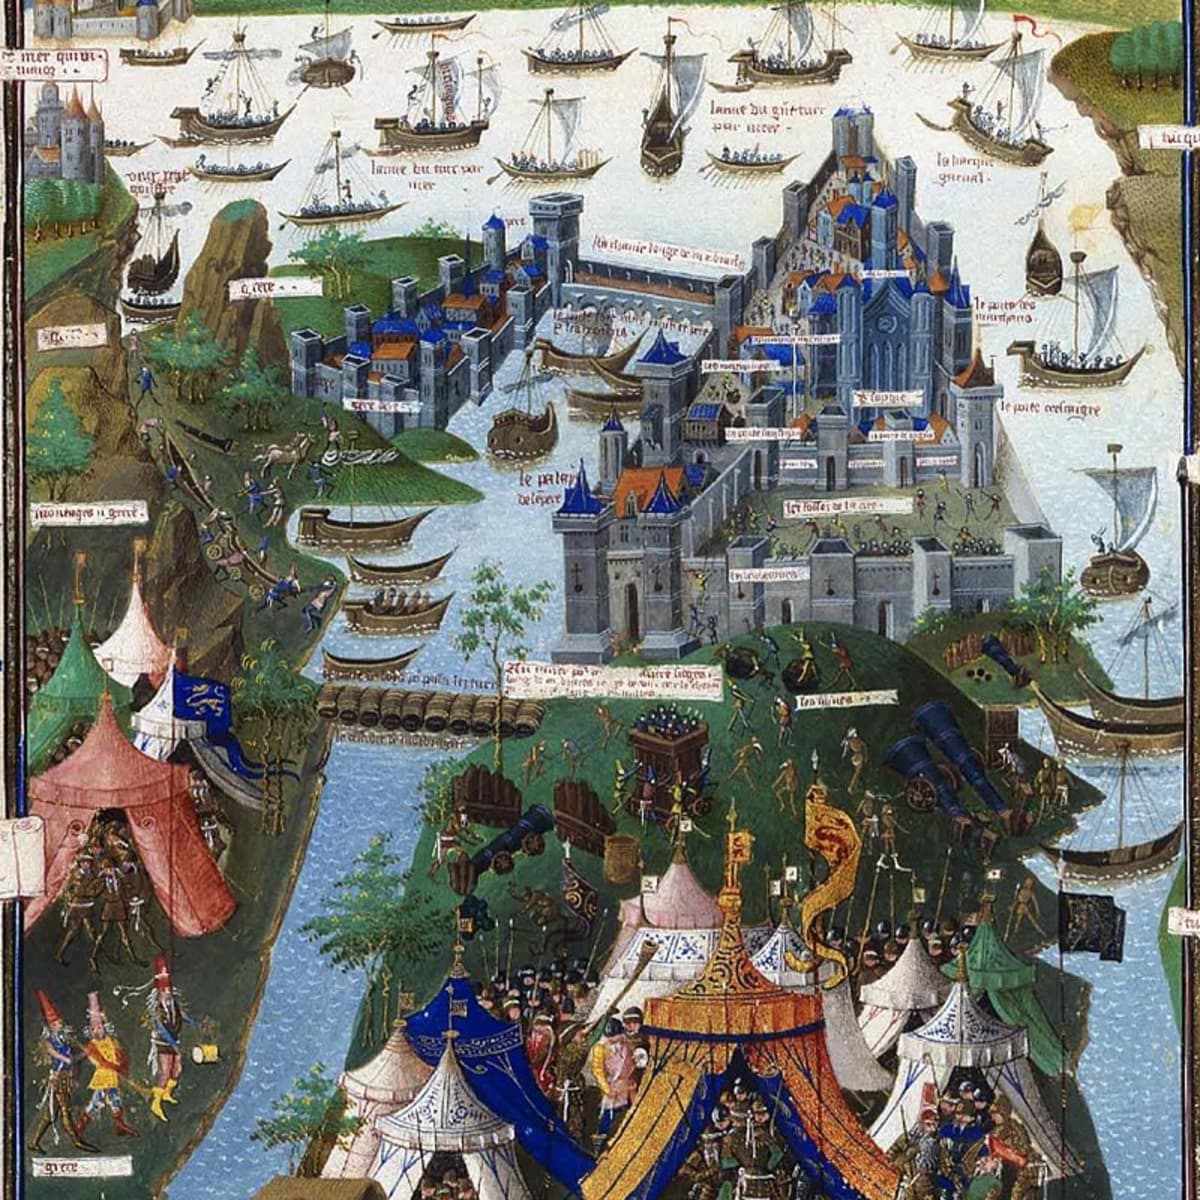 siege of constantinople